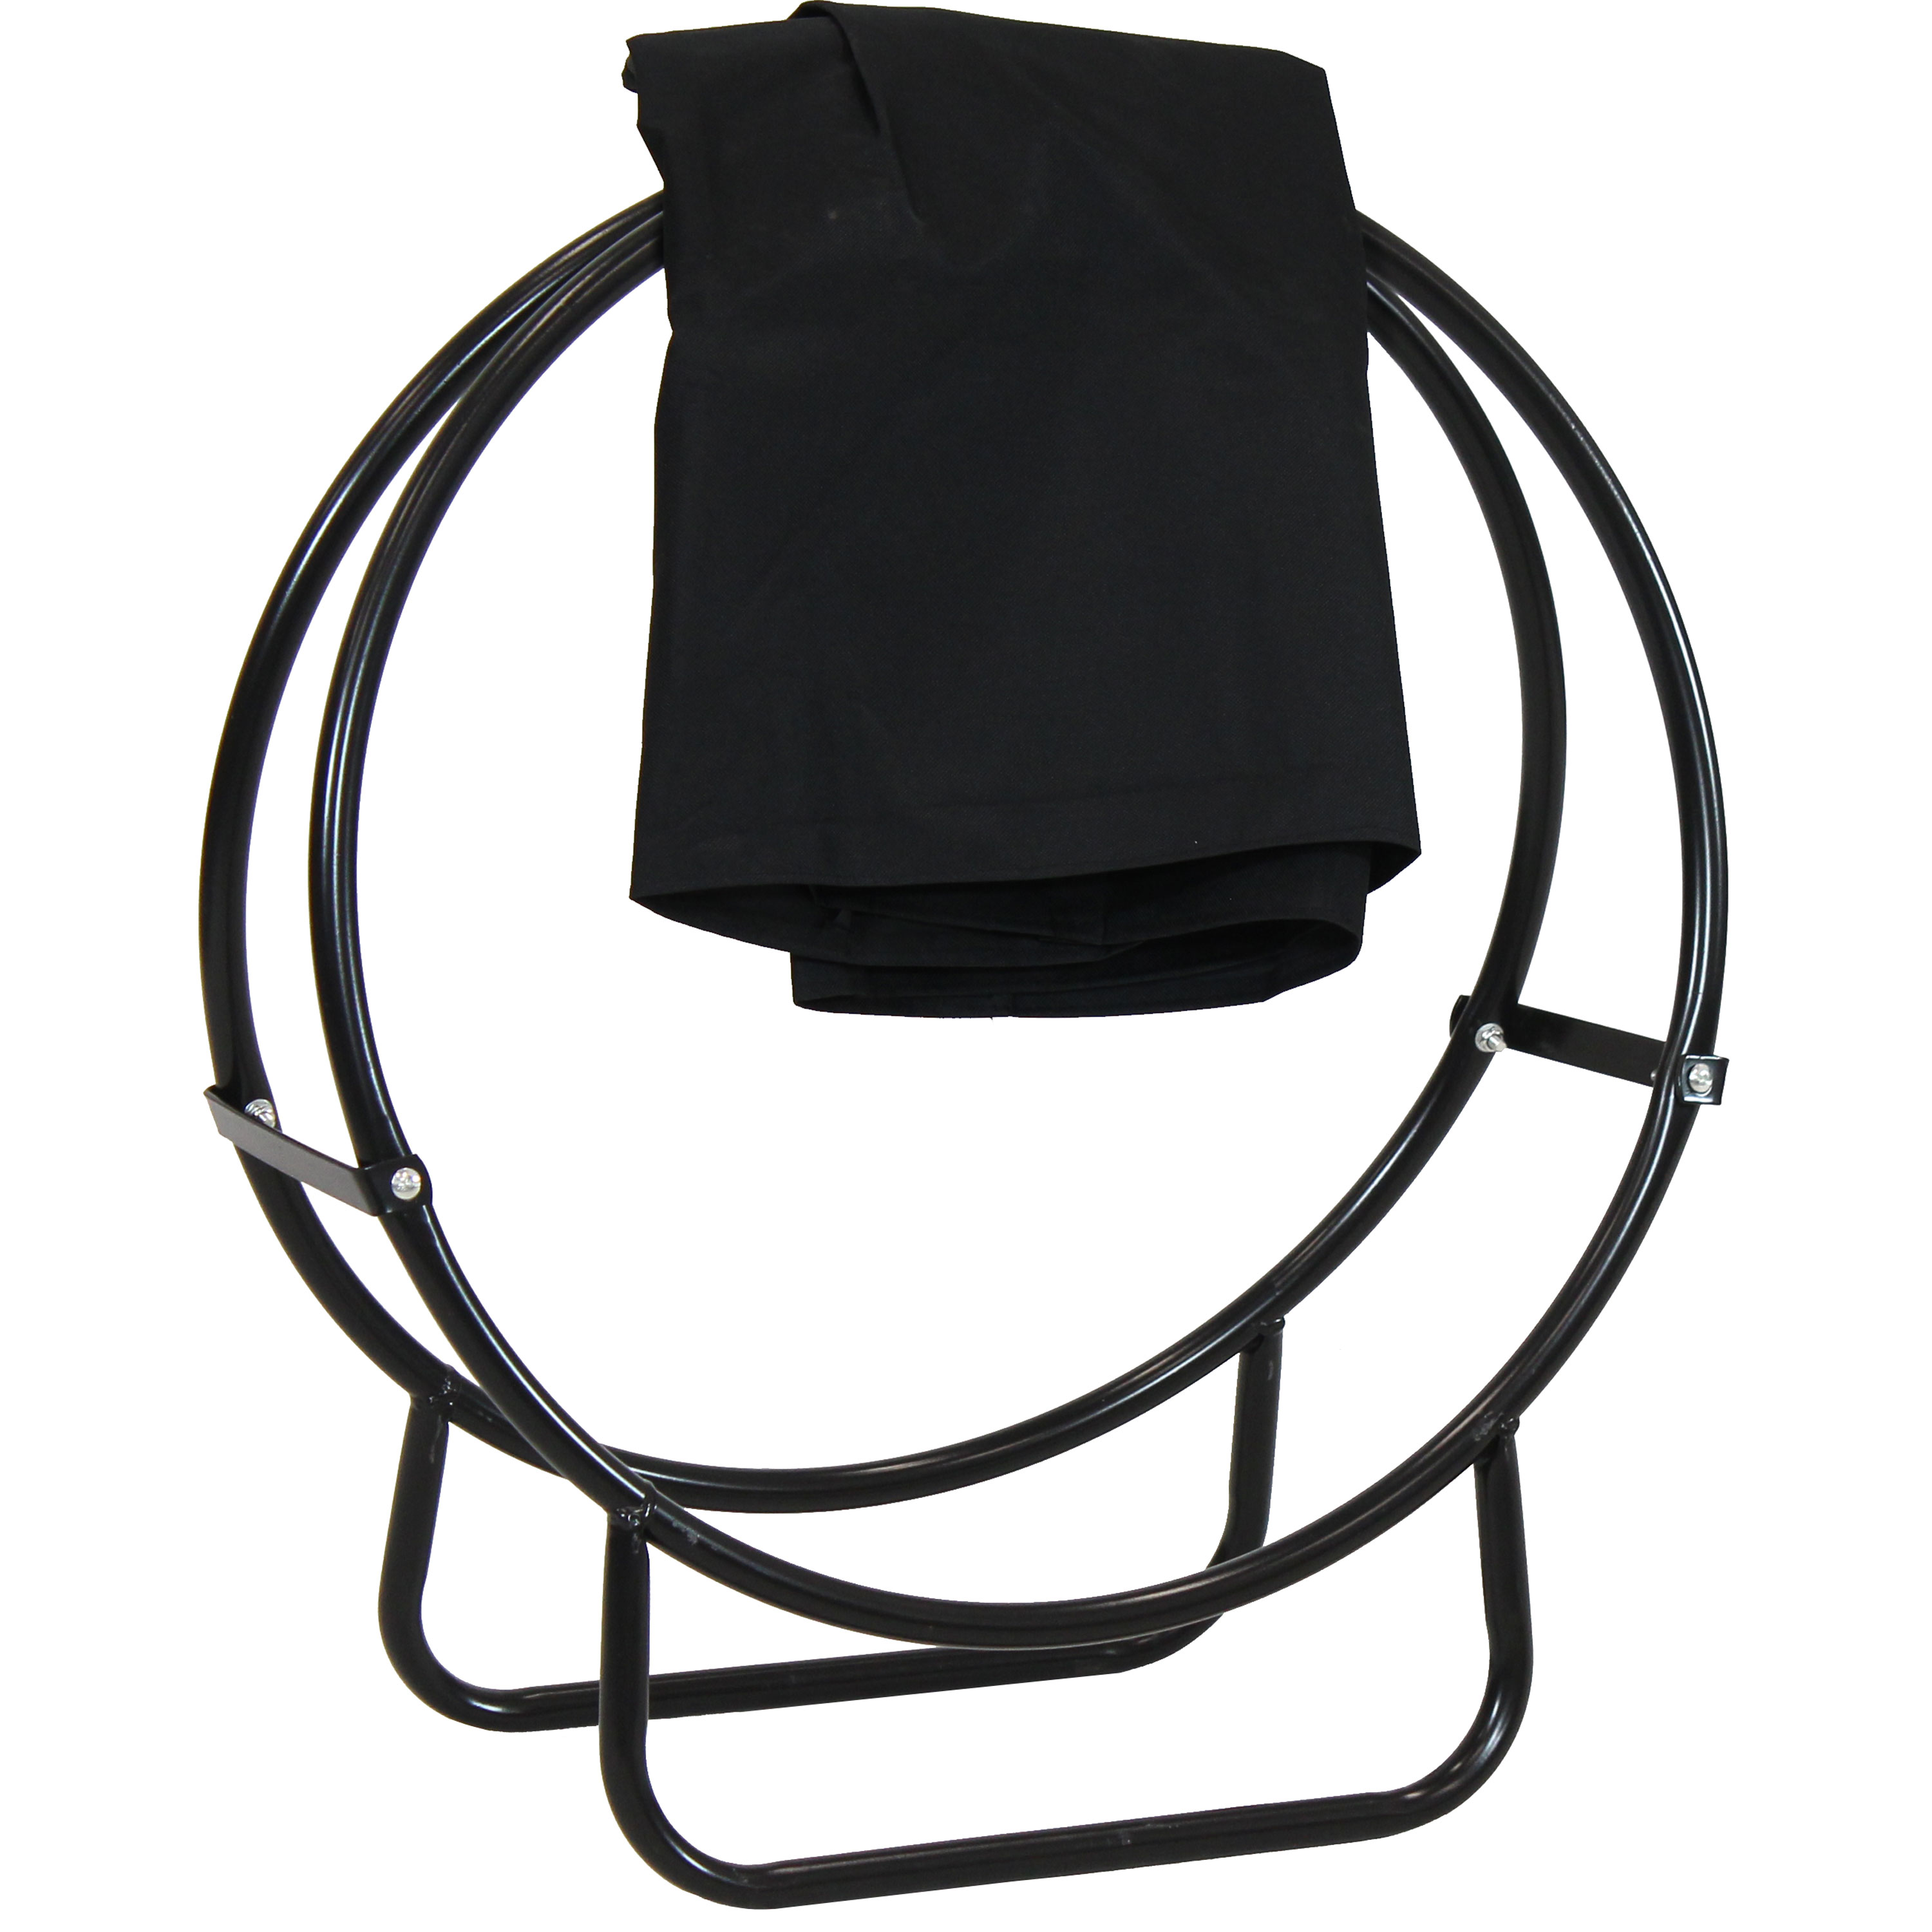 Sunnydaze Steel Firewood Log Hoop, Size and Color Options Available, Black, 24-Inch, Hoop and Cover Combo